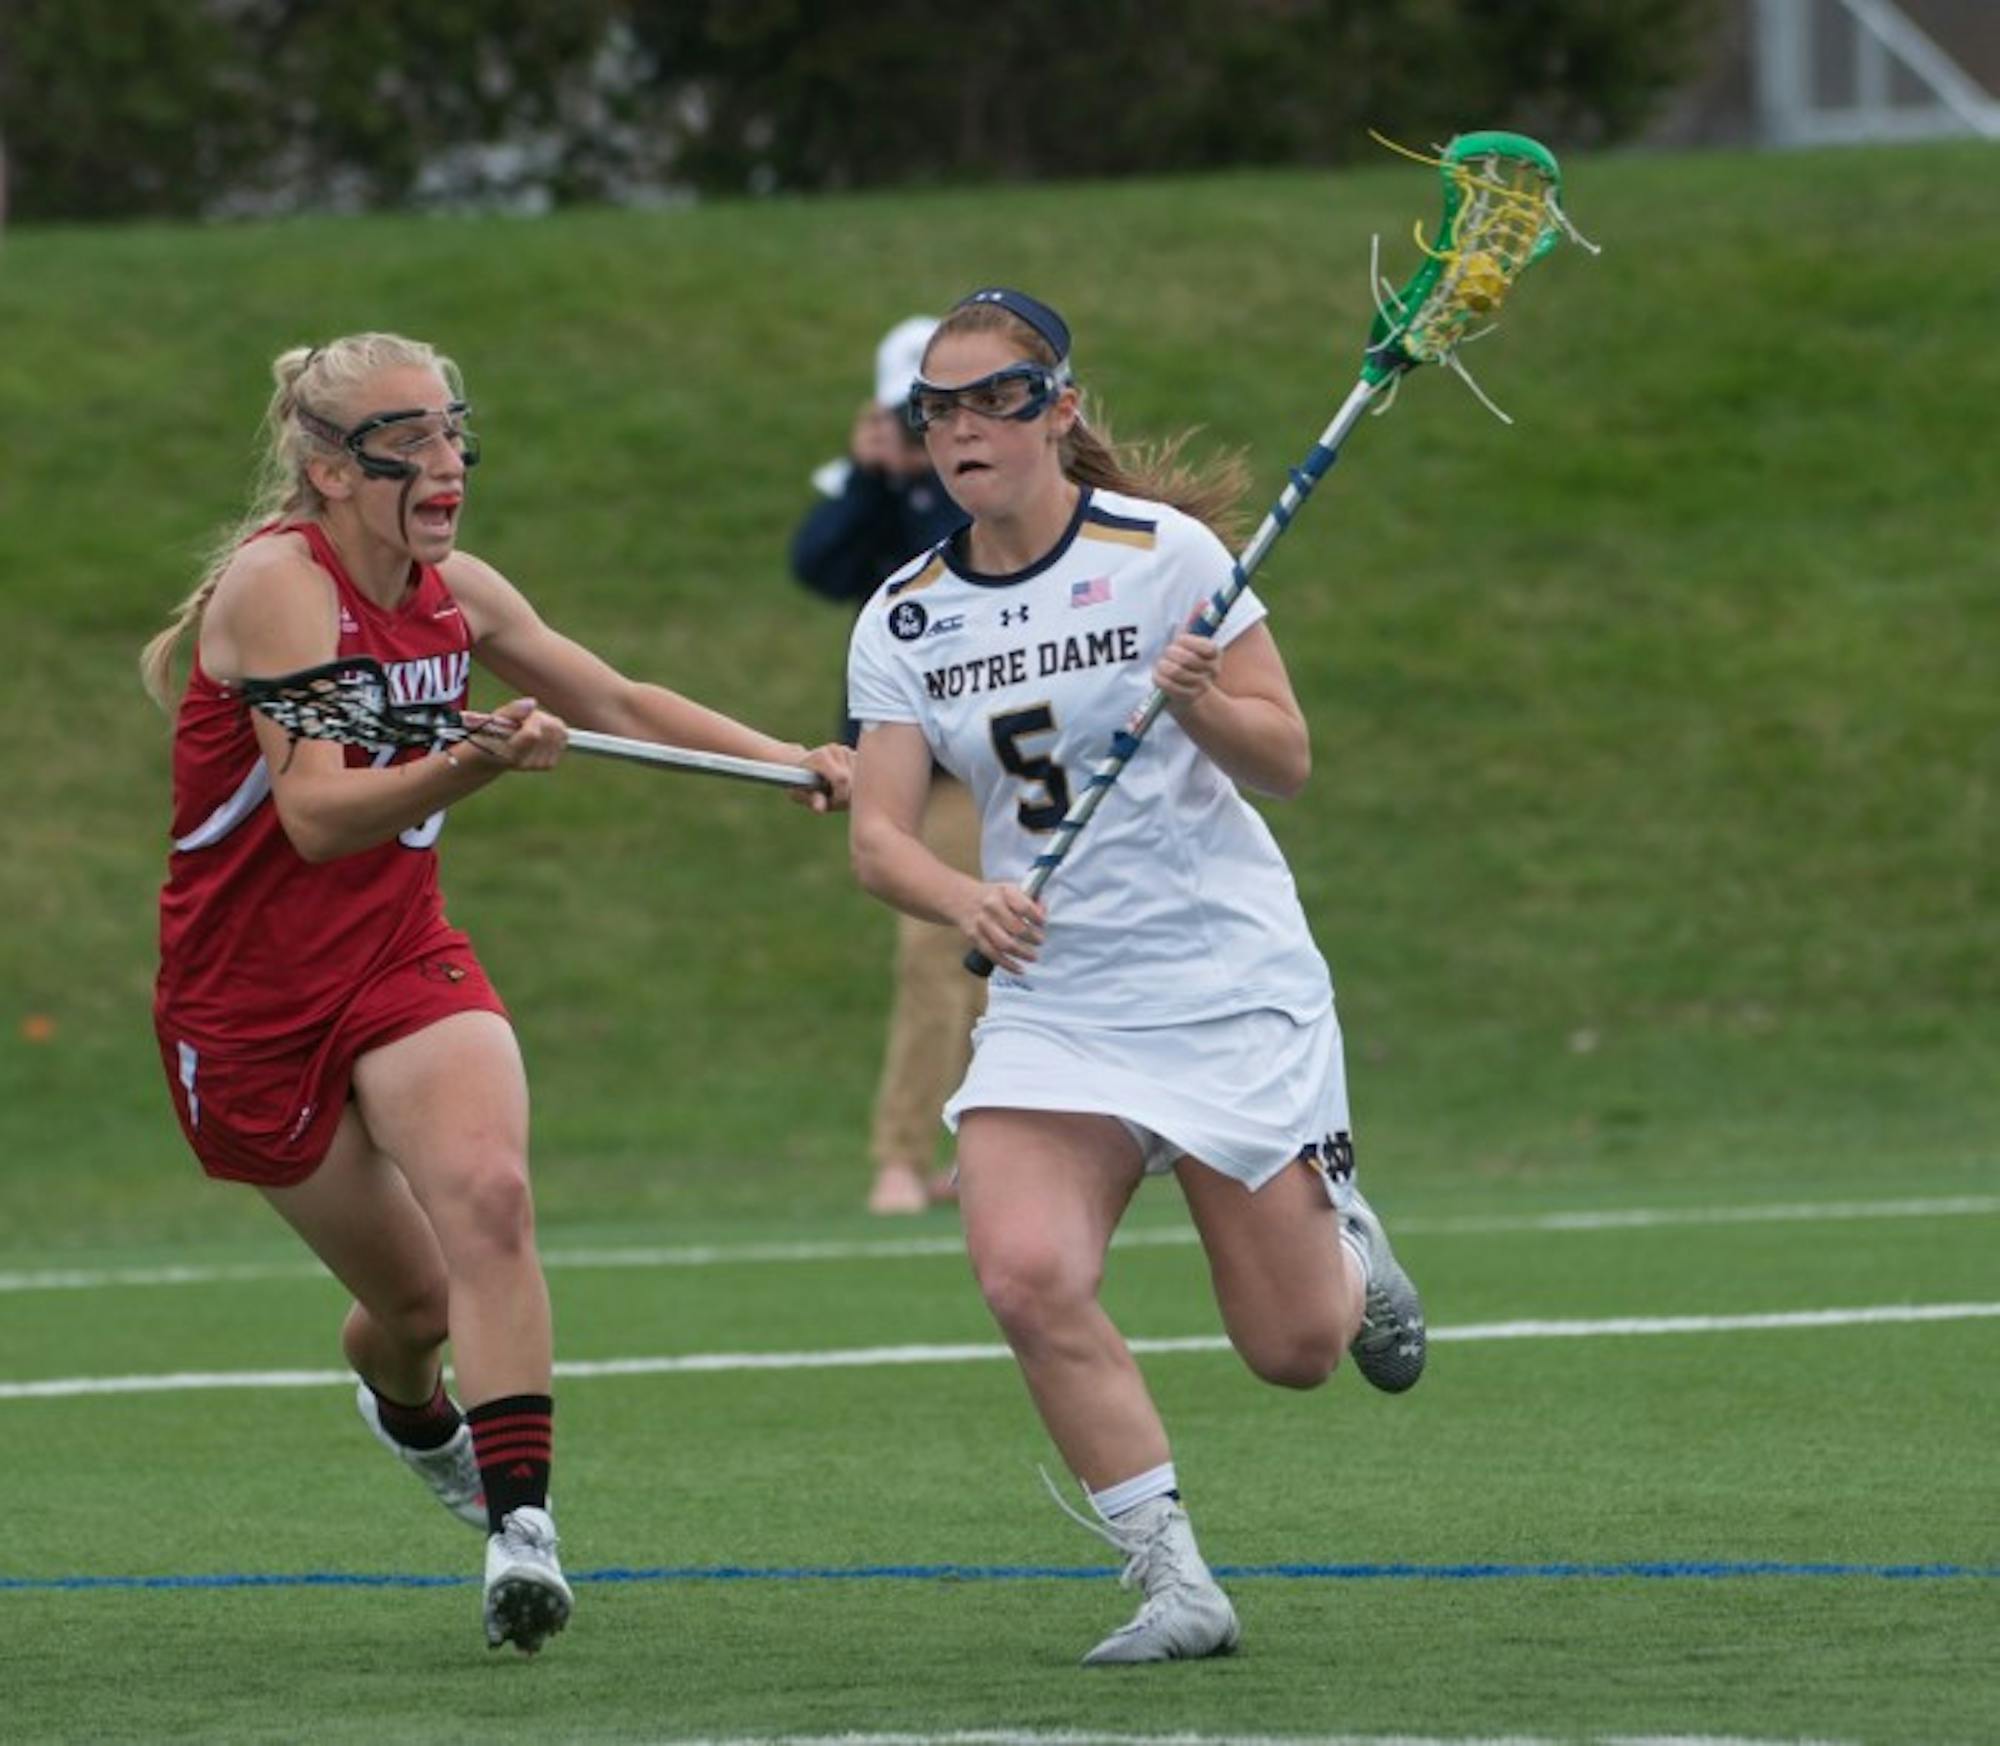 rish graduate student defender Barbara Sullivan possesses the ball during Notre Dame’s 10-8 home loss to Louisville on April 19.